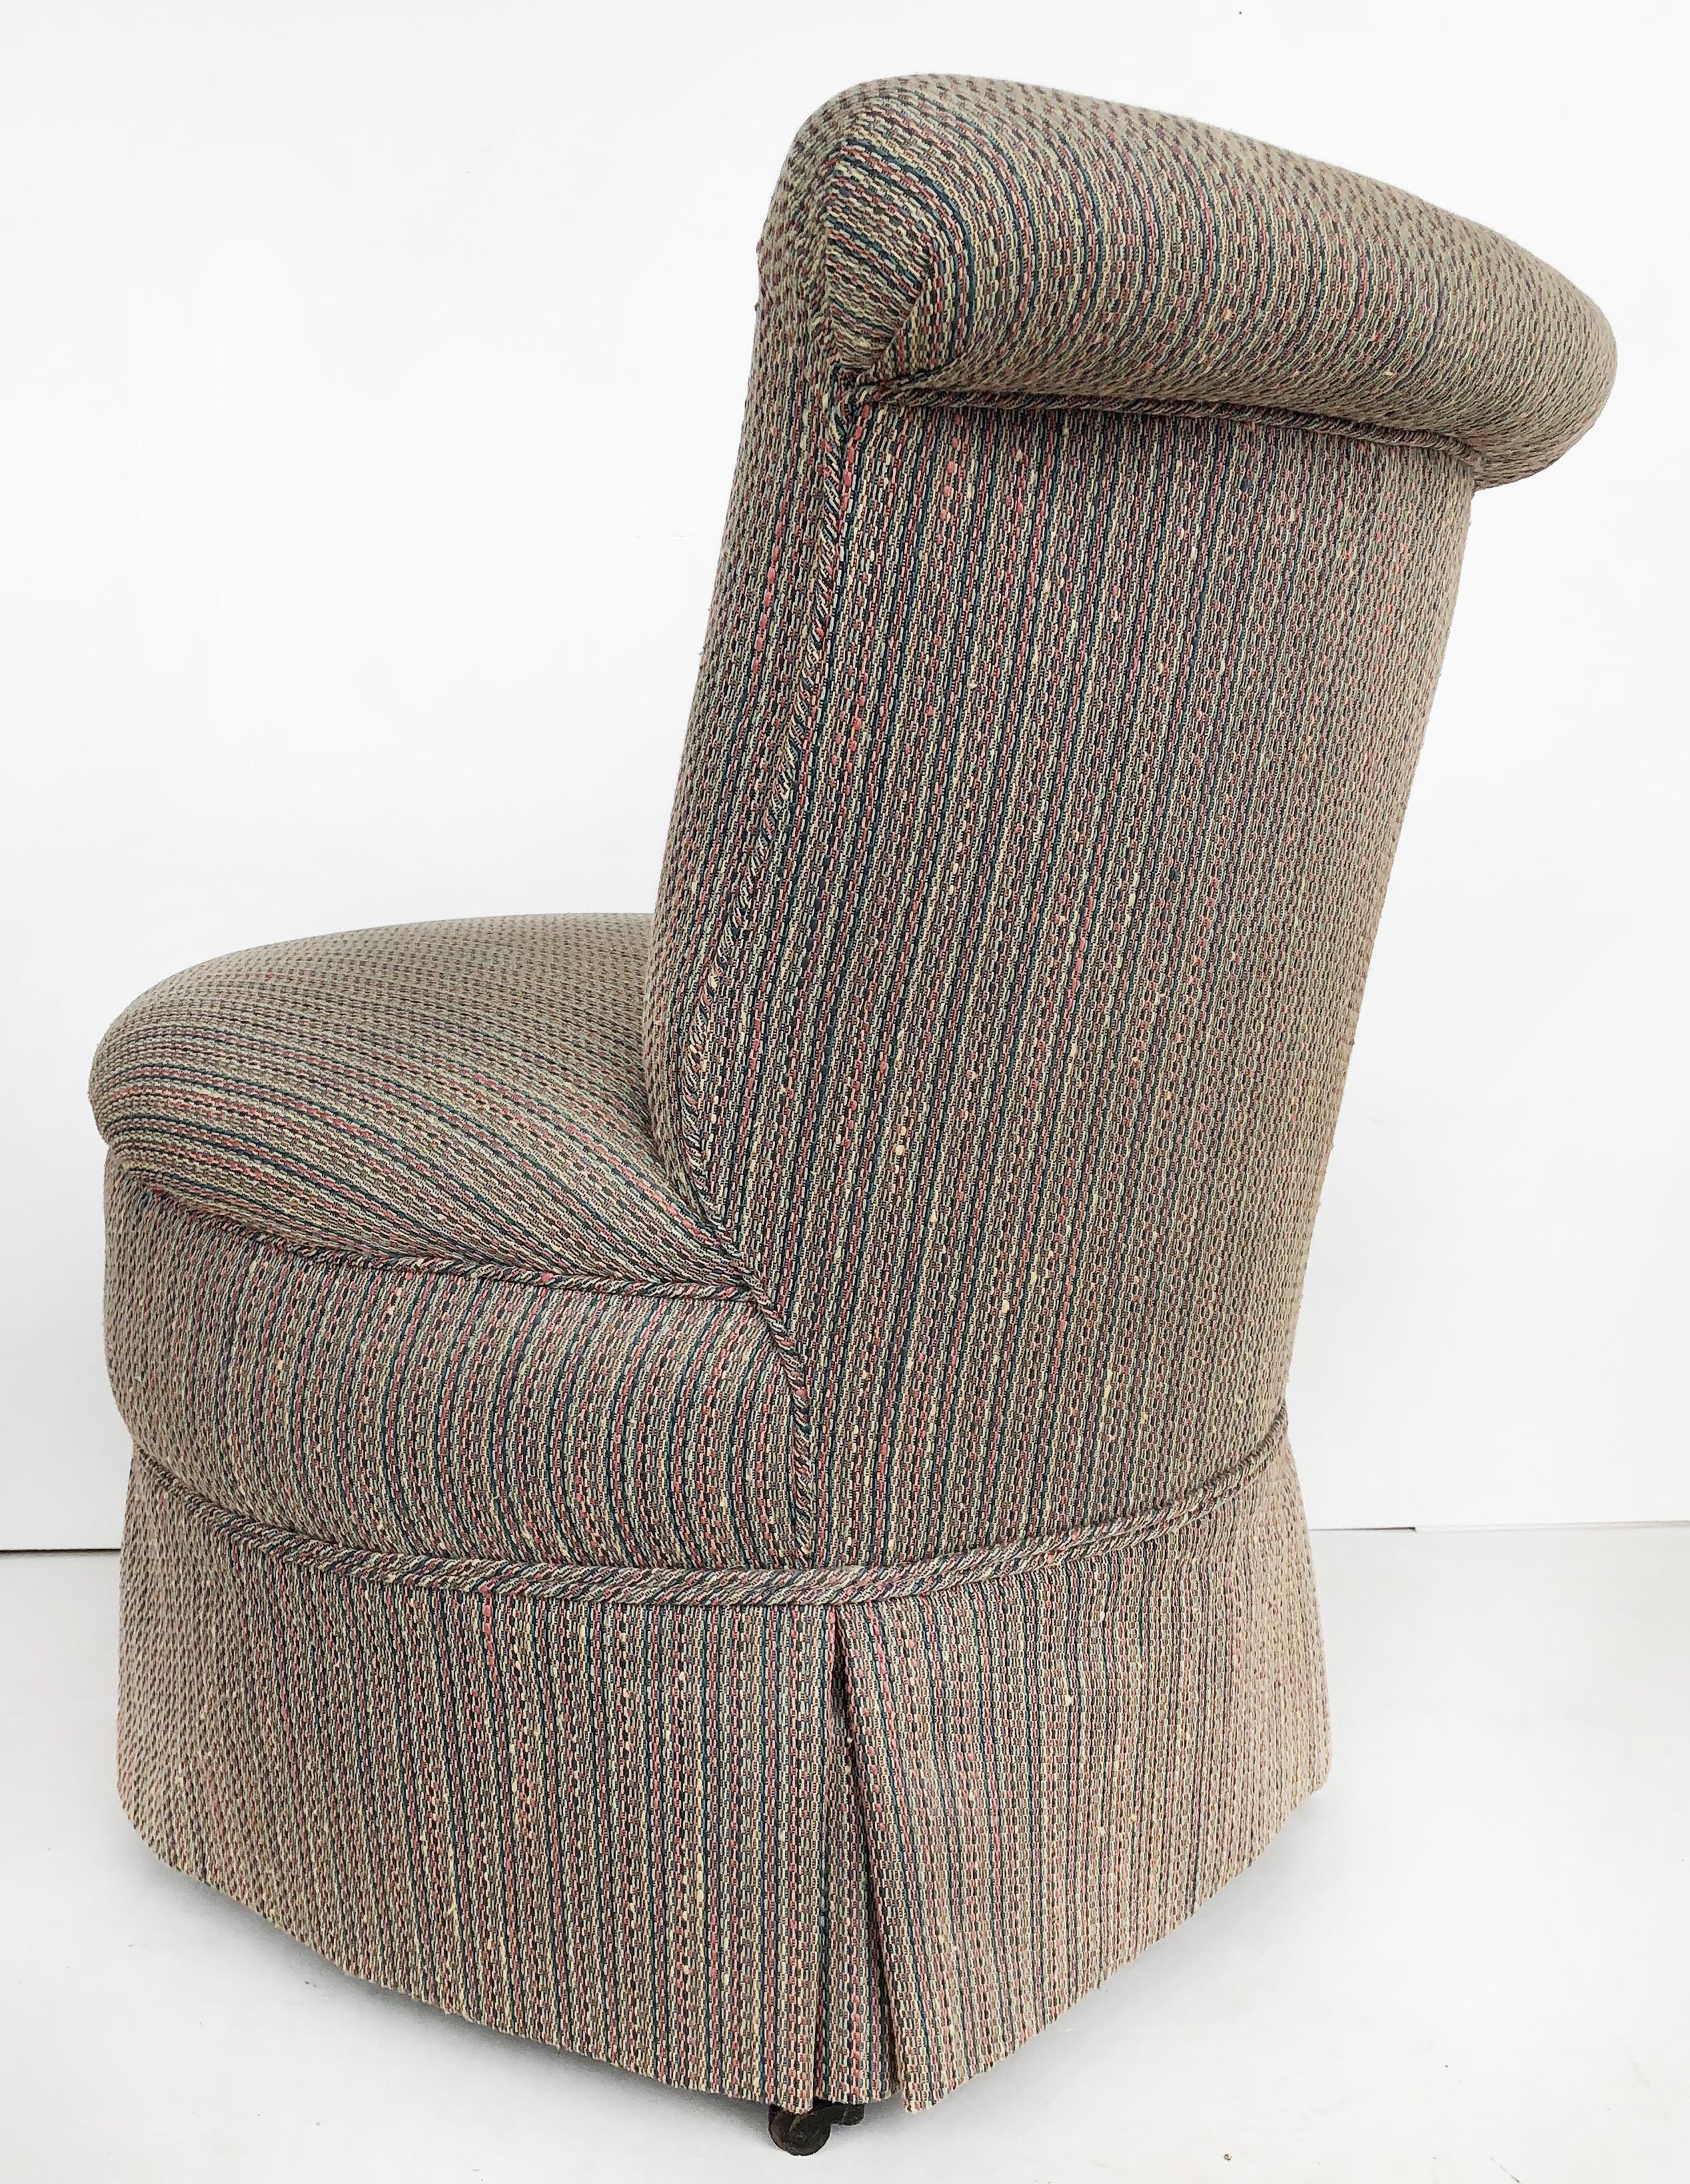 20th Century Antique Napoleon III Slipper Chair circa 1900, Turned Legs on Casters